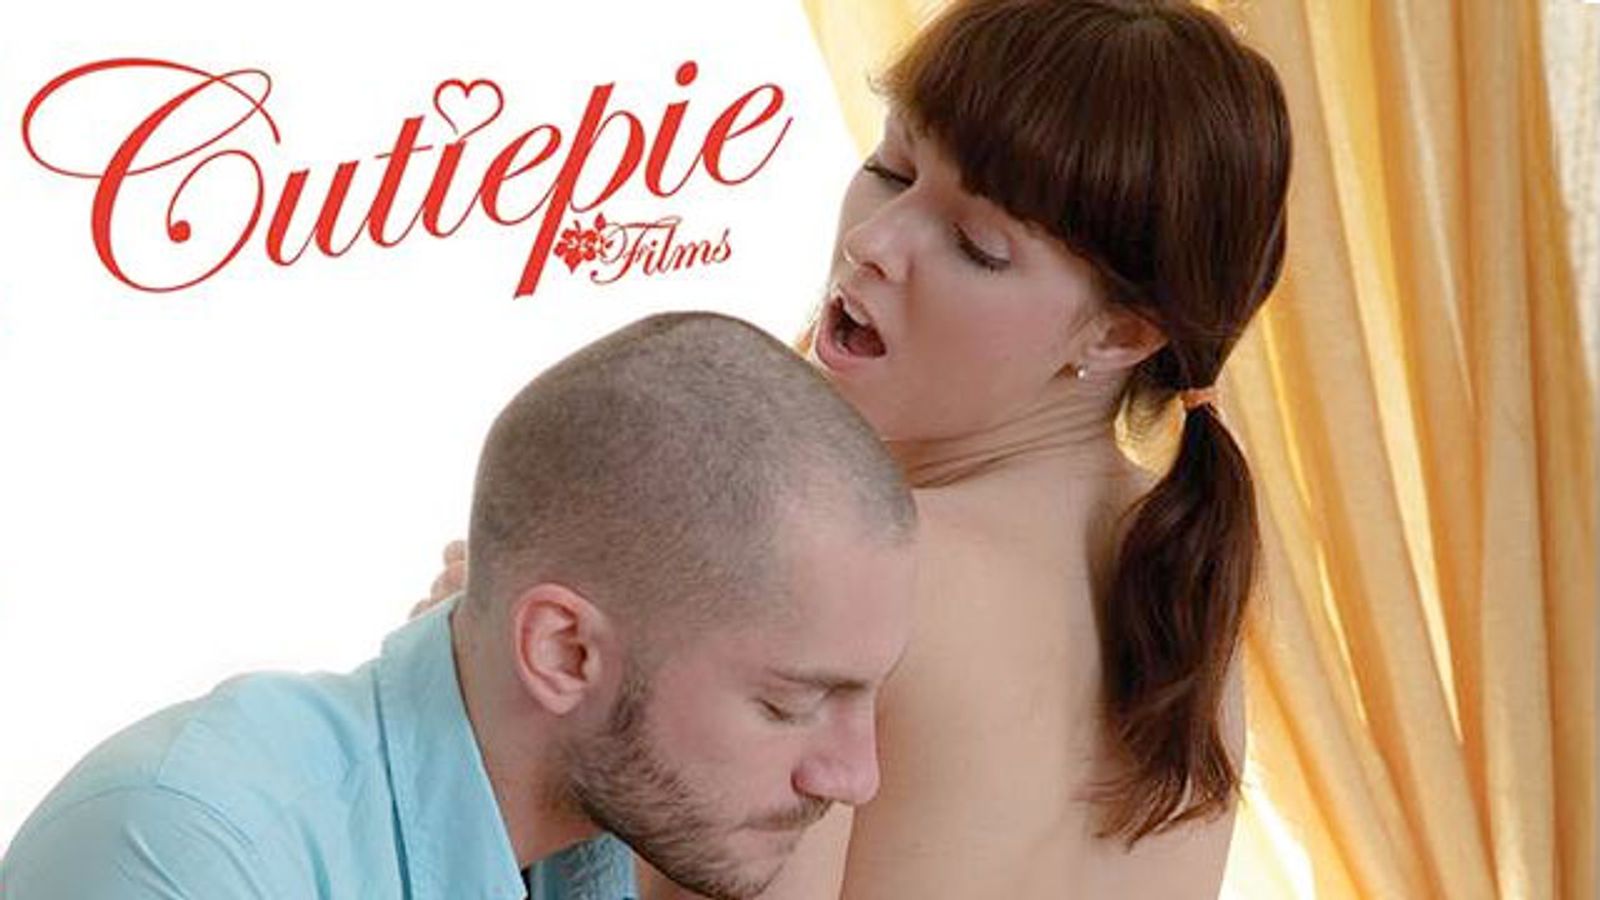 Exile to Release First Cutiepie Films Title